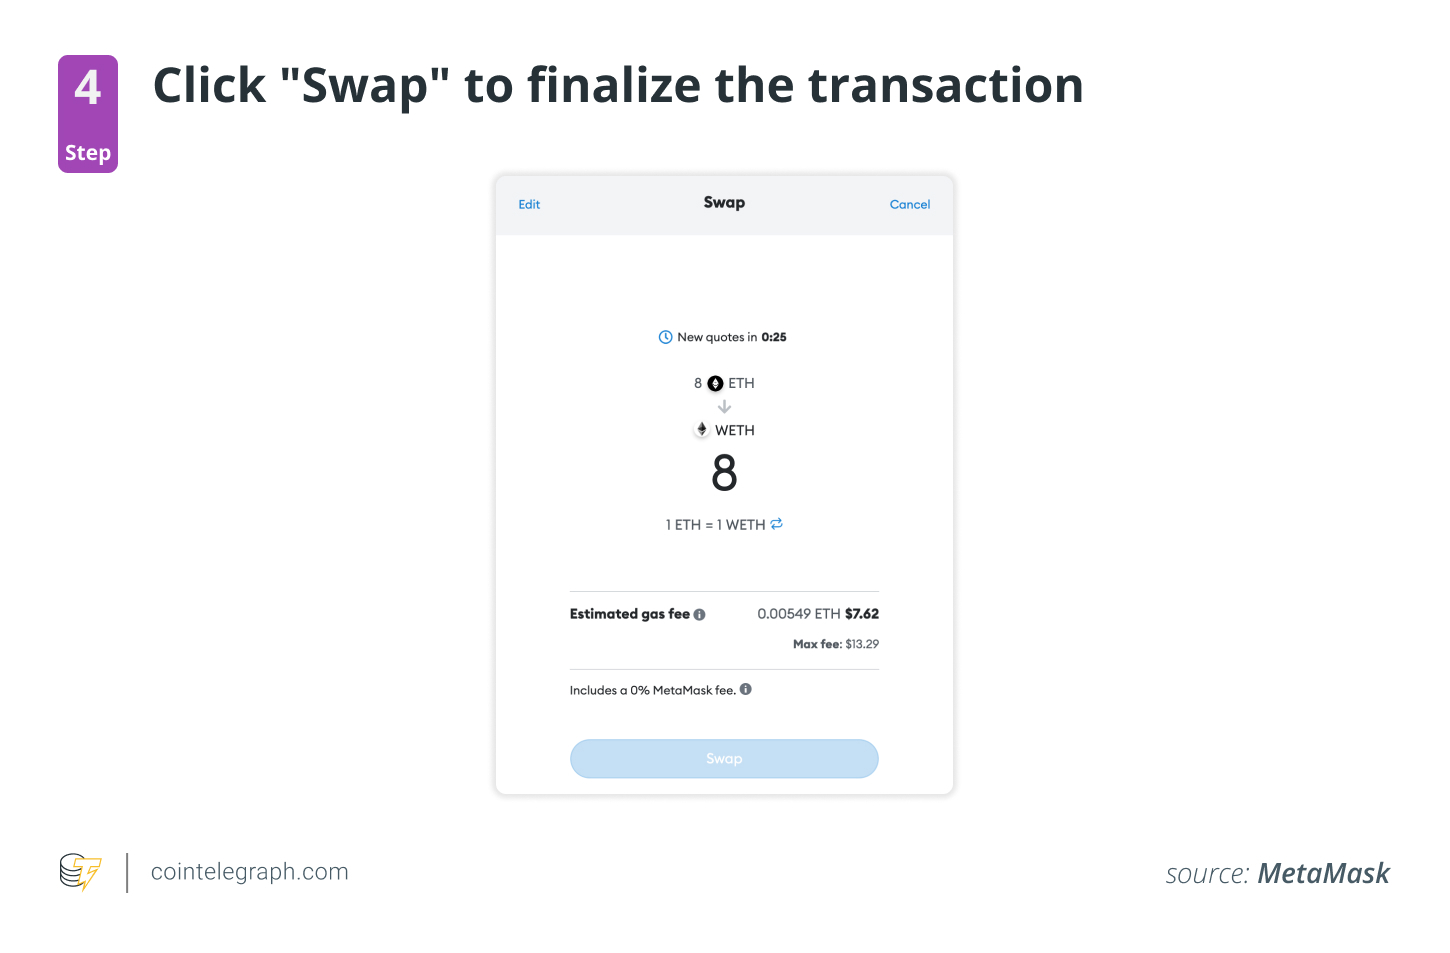 Step 4: Click "Swap" to finalize the transaction